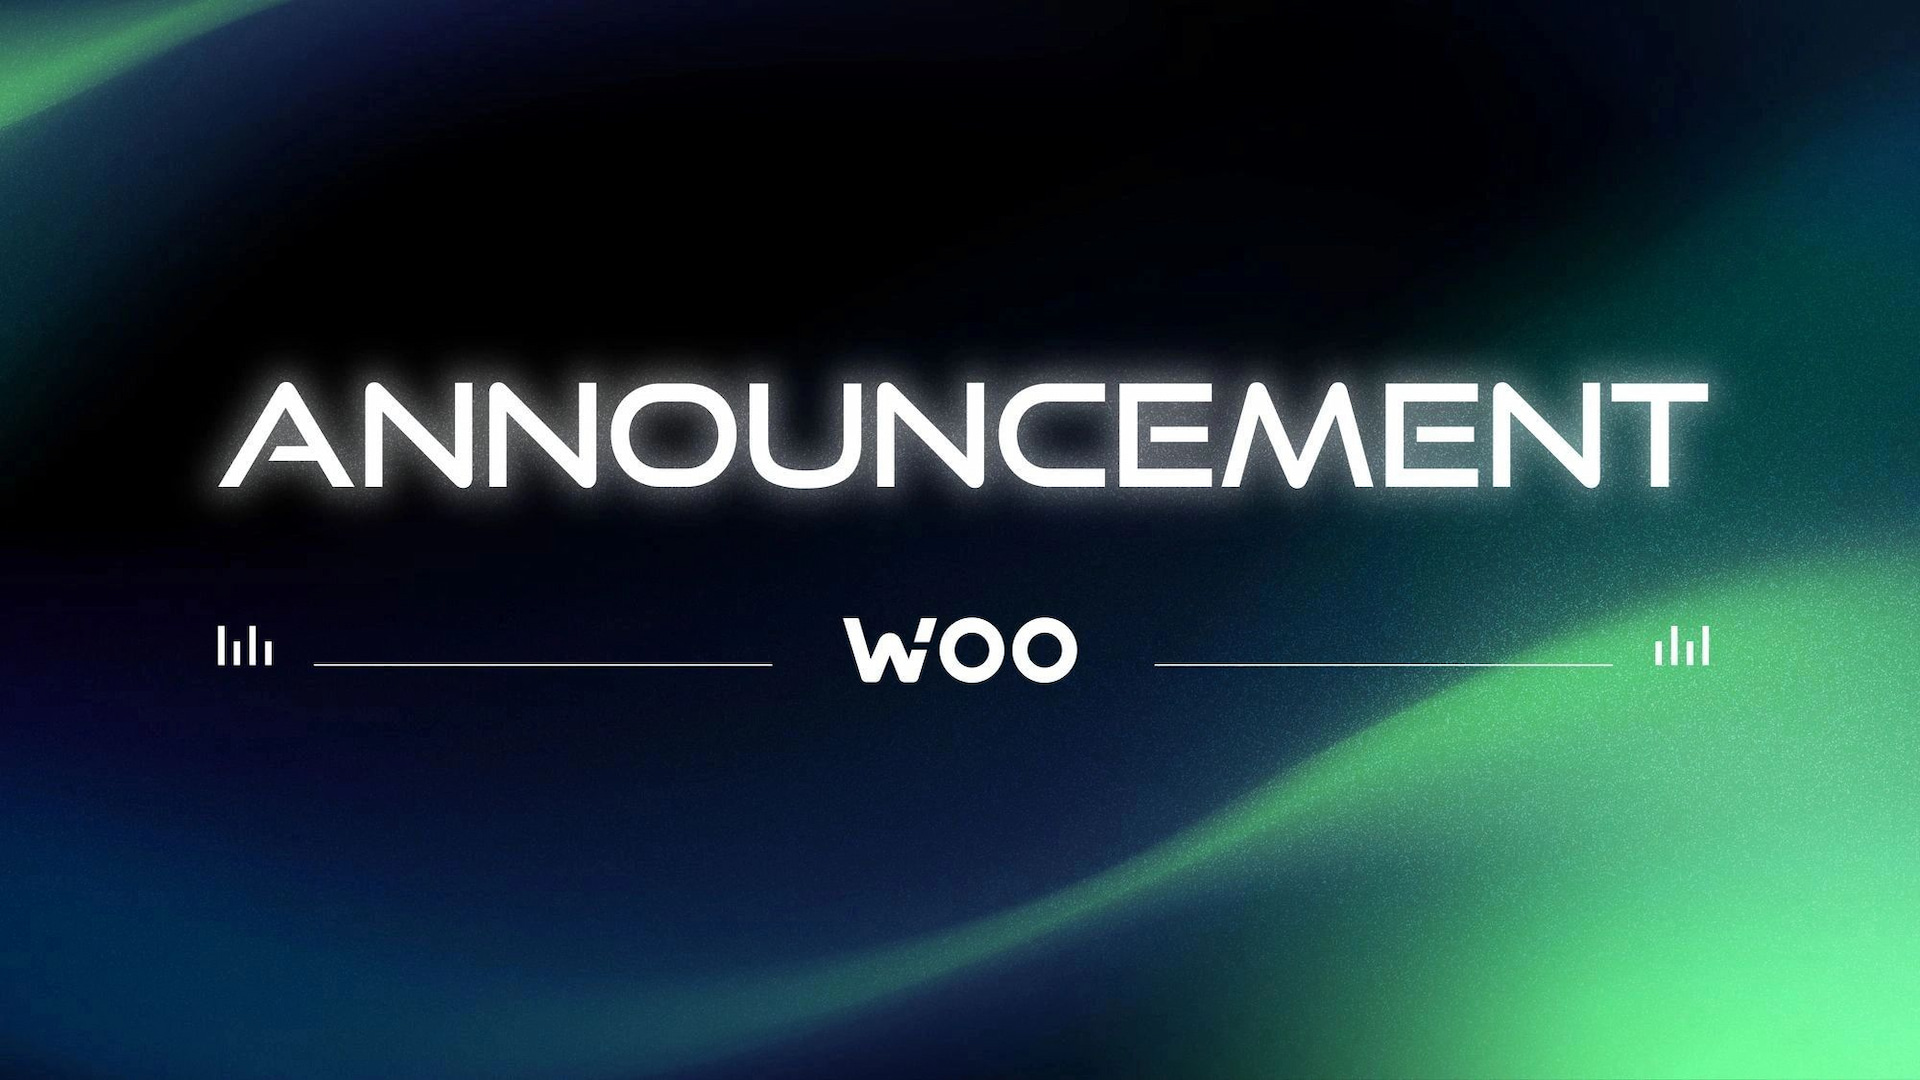 WOO X resumes business as usual following a security incident with one of its market makers